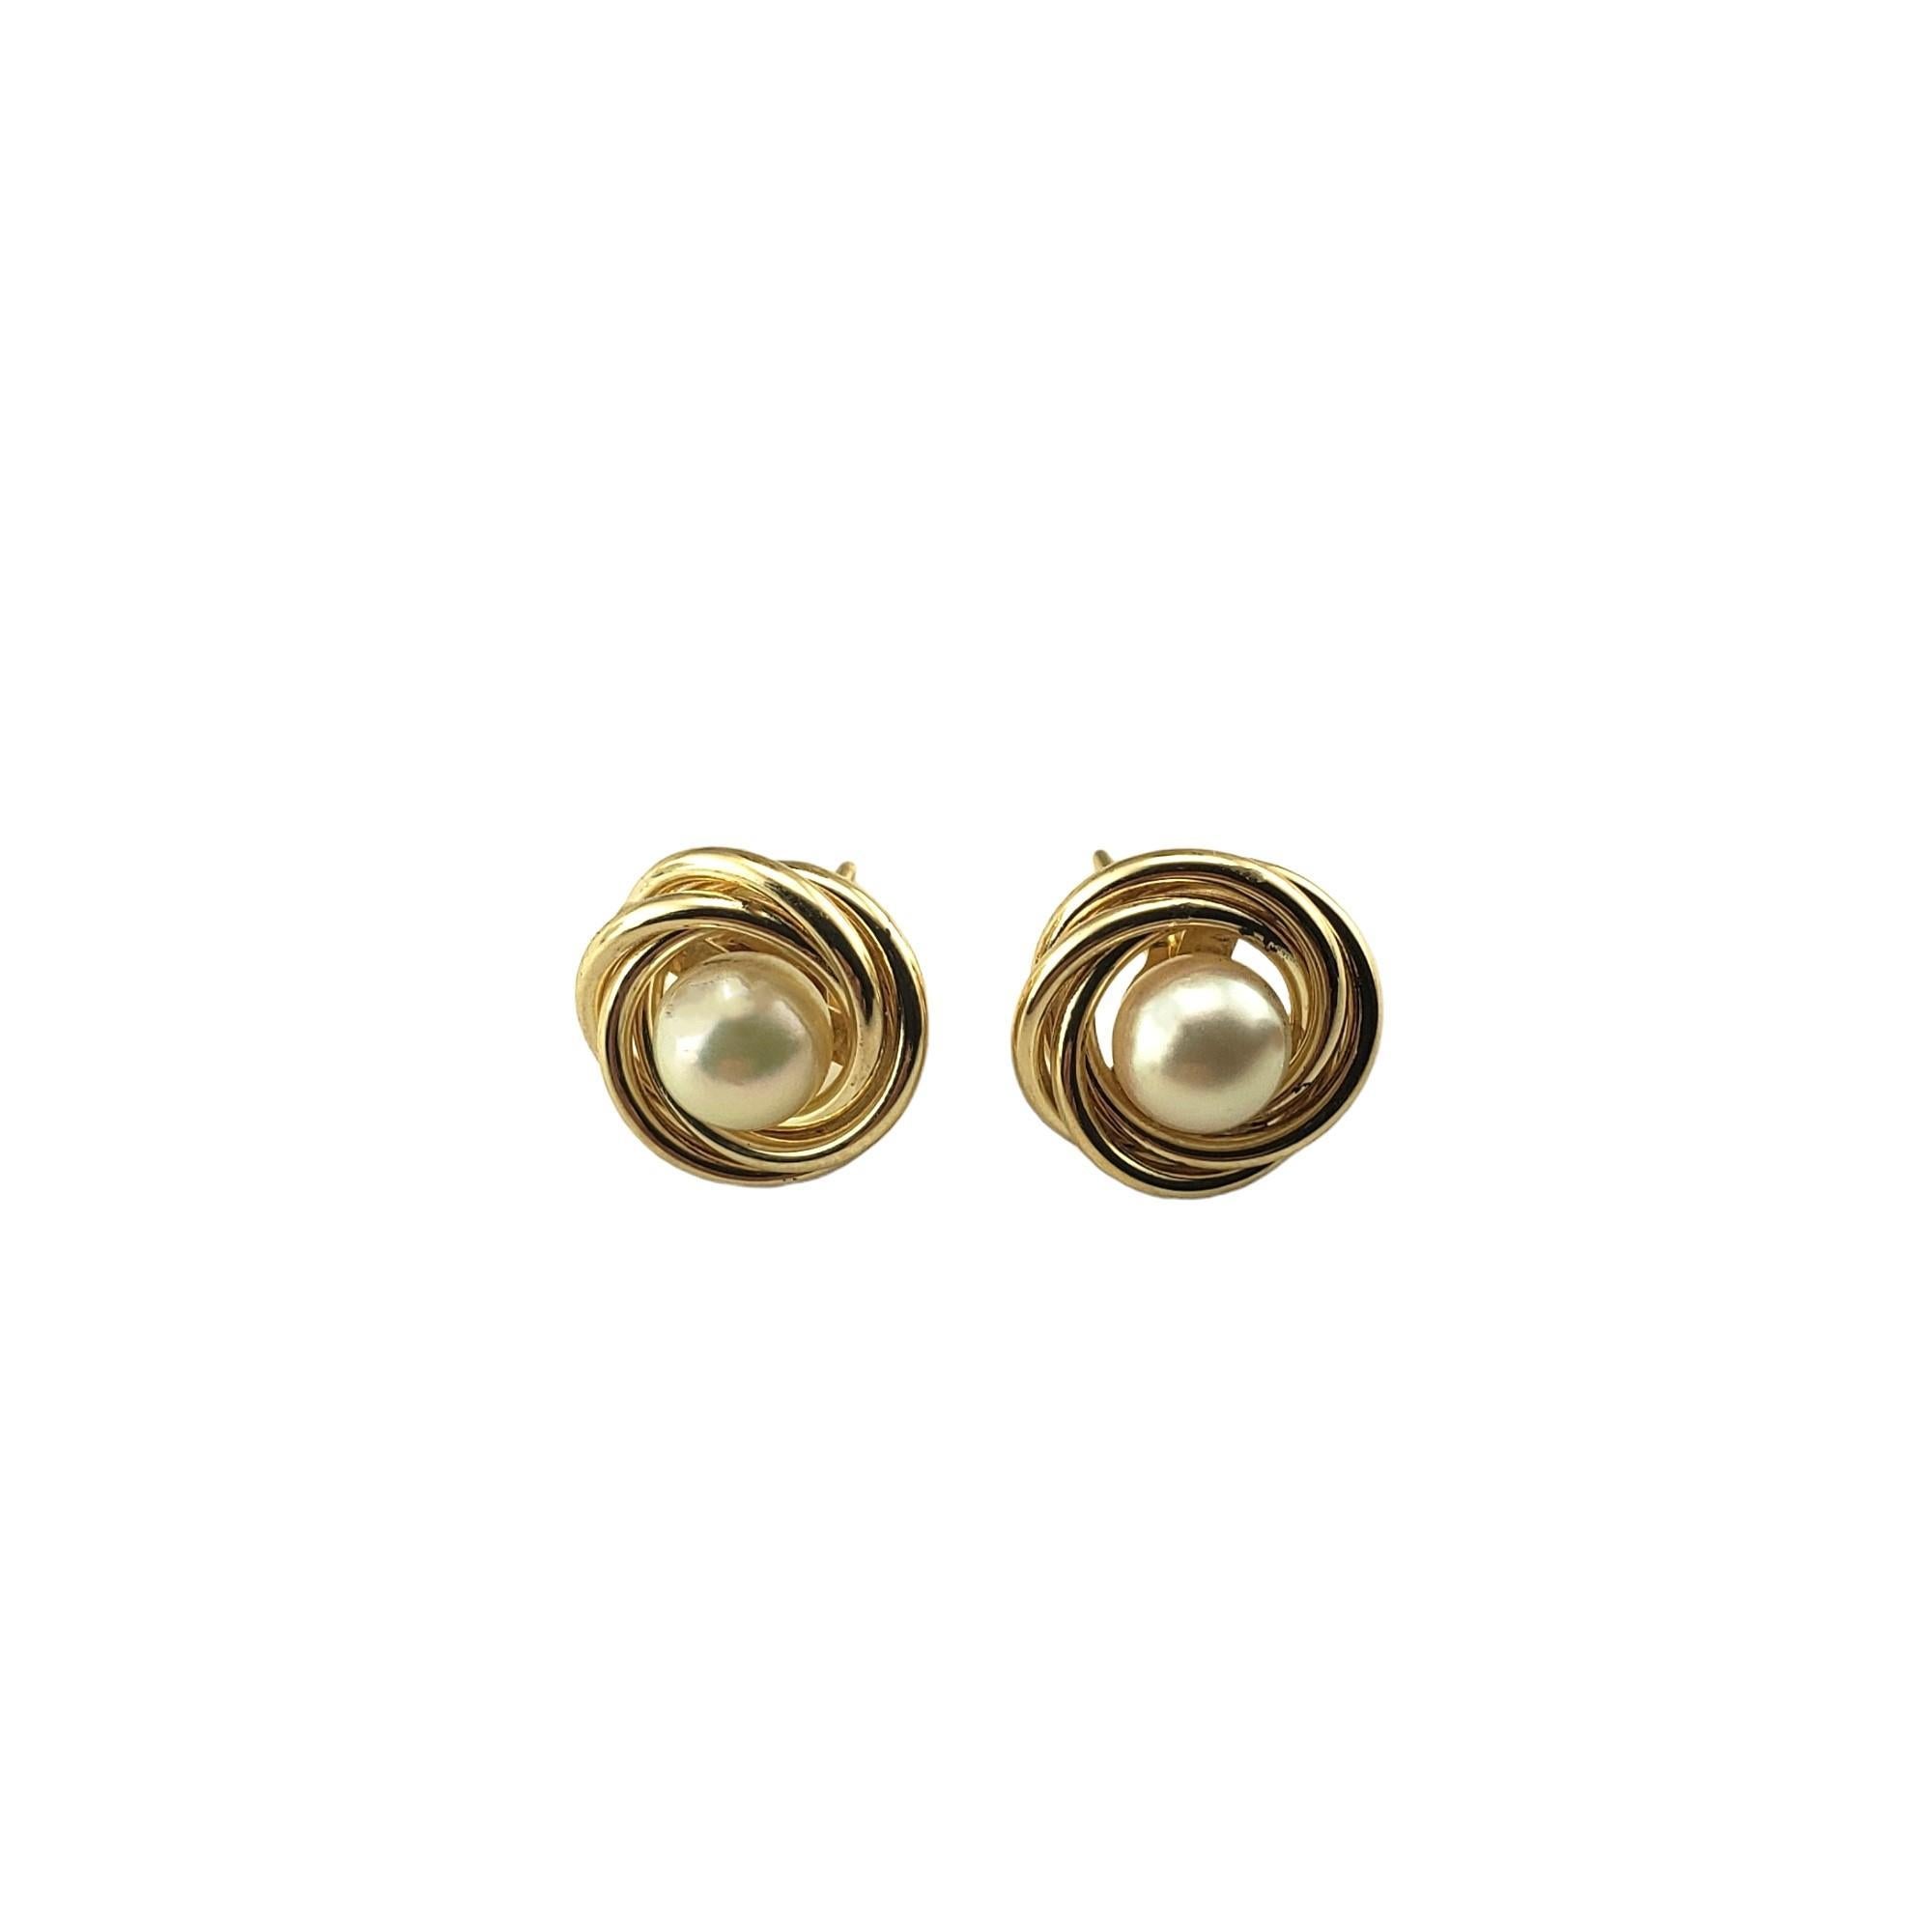 Vintage 14 Karat Yellow Gold and Pearl Earrings-

These elegant earrings each feature one round pearl (6 mm) set in classic 14K yellow gold.  Push back closures.

Size: 12.5 mm 

Stamped: 14K

Weight: 2.4 gr./ 1.5 dwt.

Very good condition,